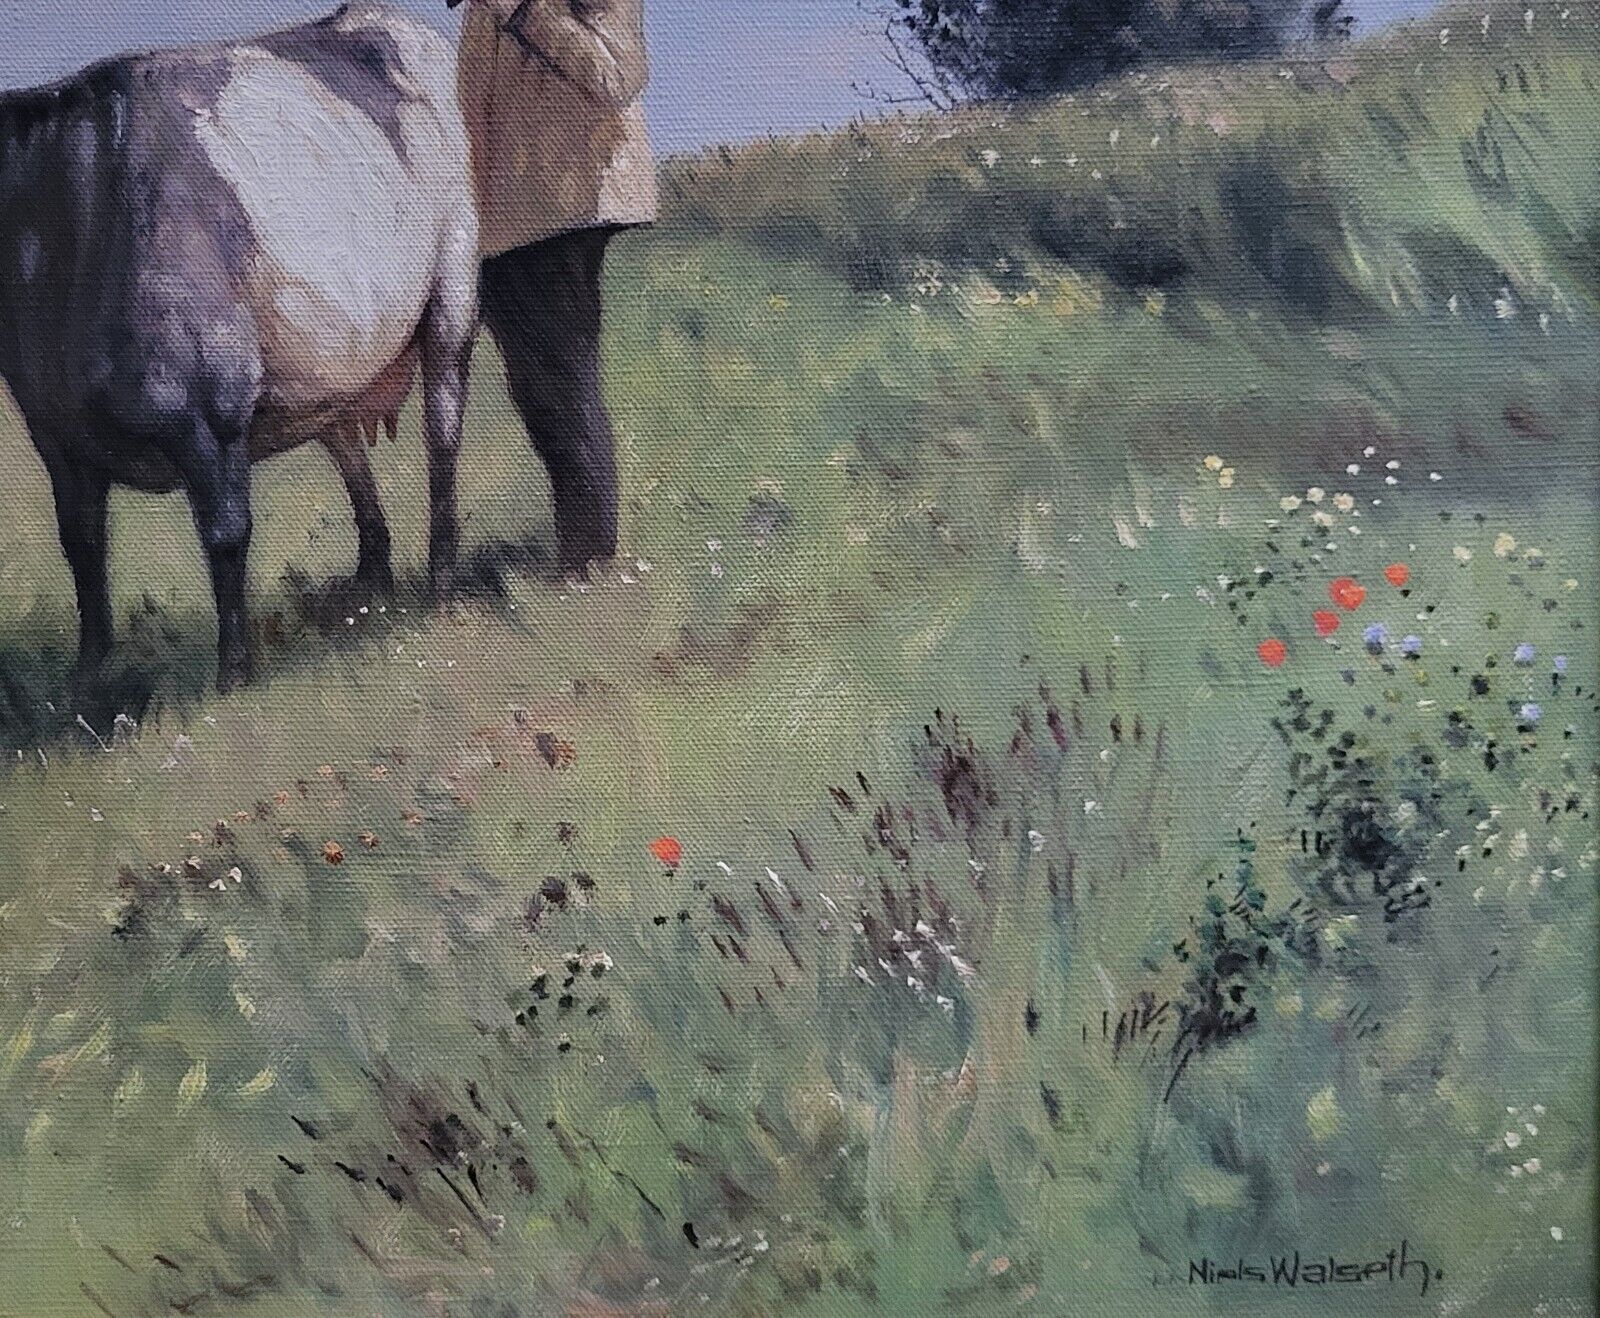 Oil painting Niels Walseth (1914-2001): “A man and his cow”